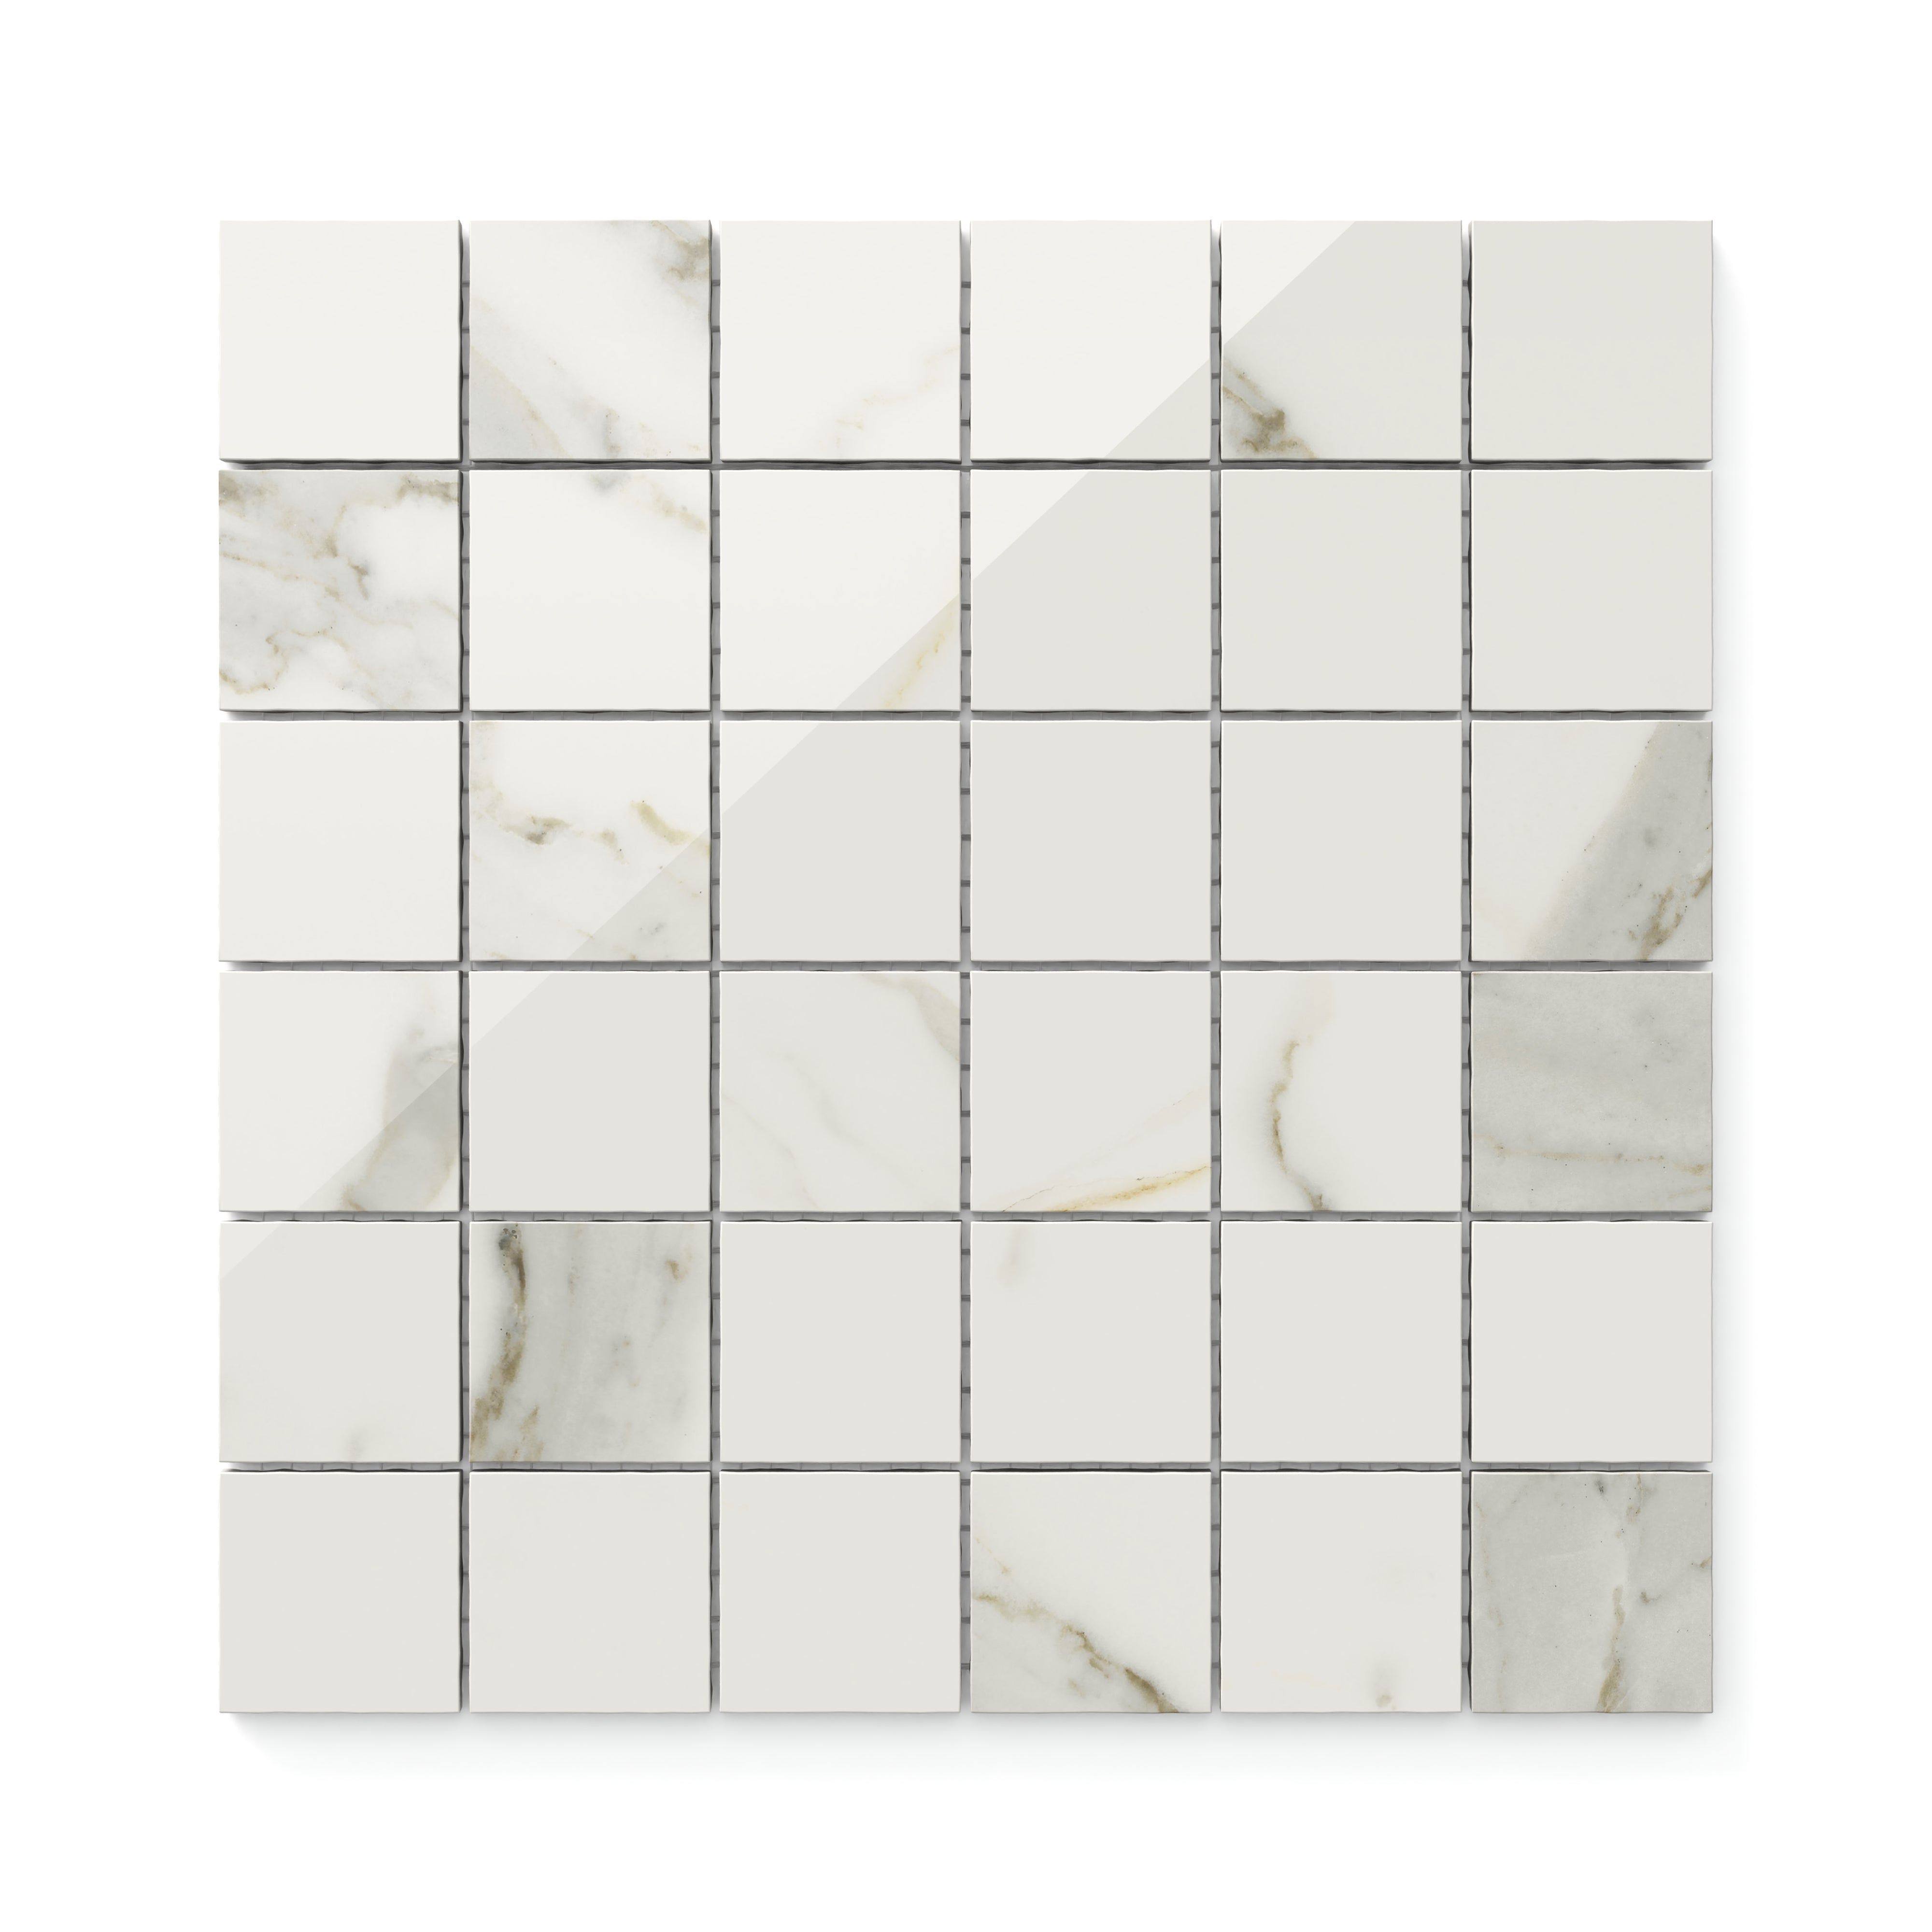 Aniston 2x2 Polished Porcelain Mosaic Tile in Calacatta Top